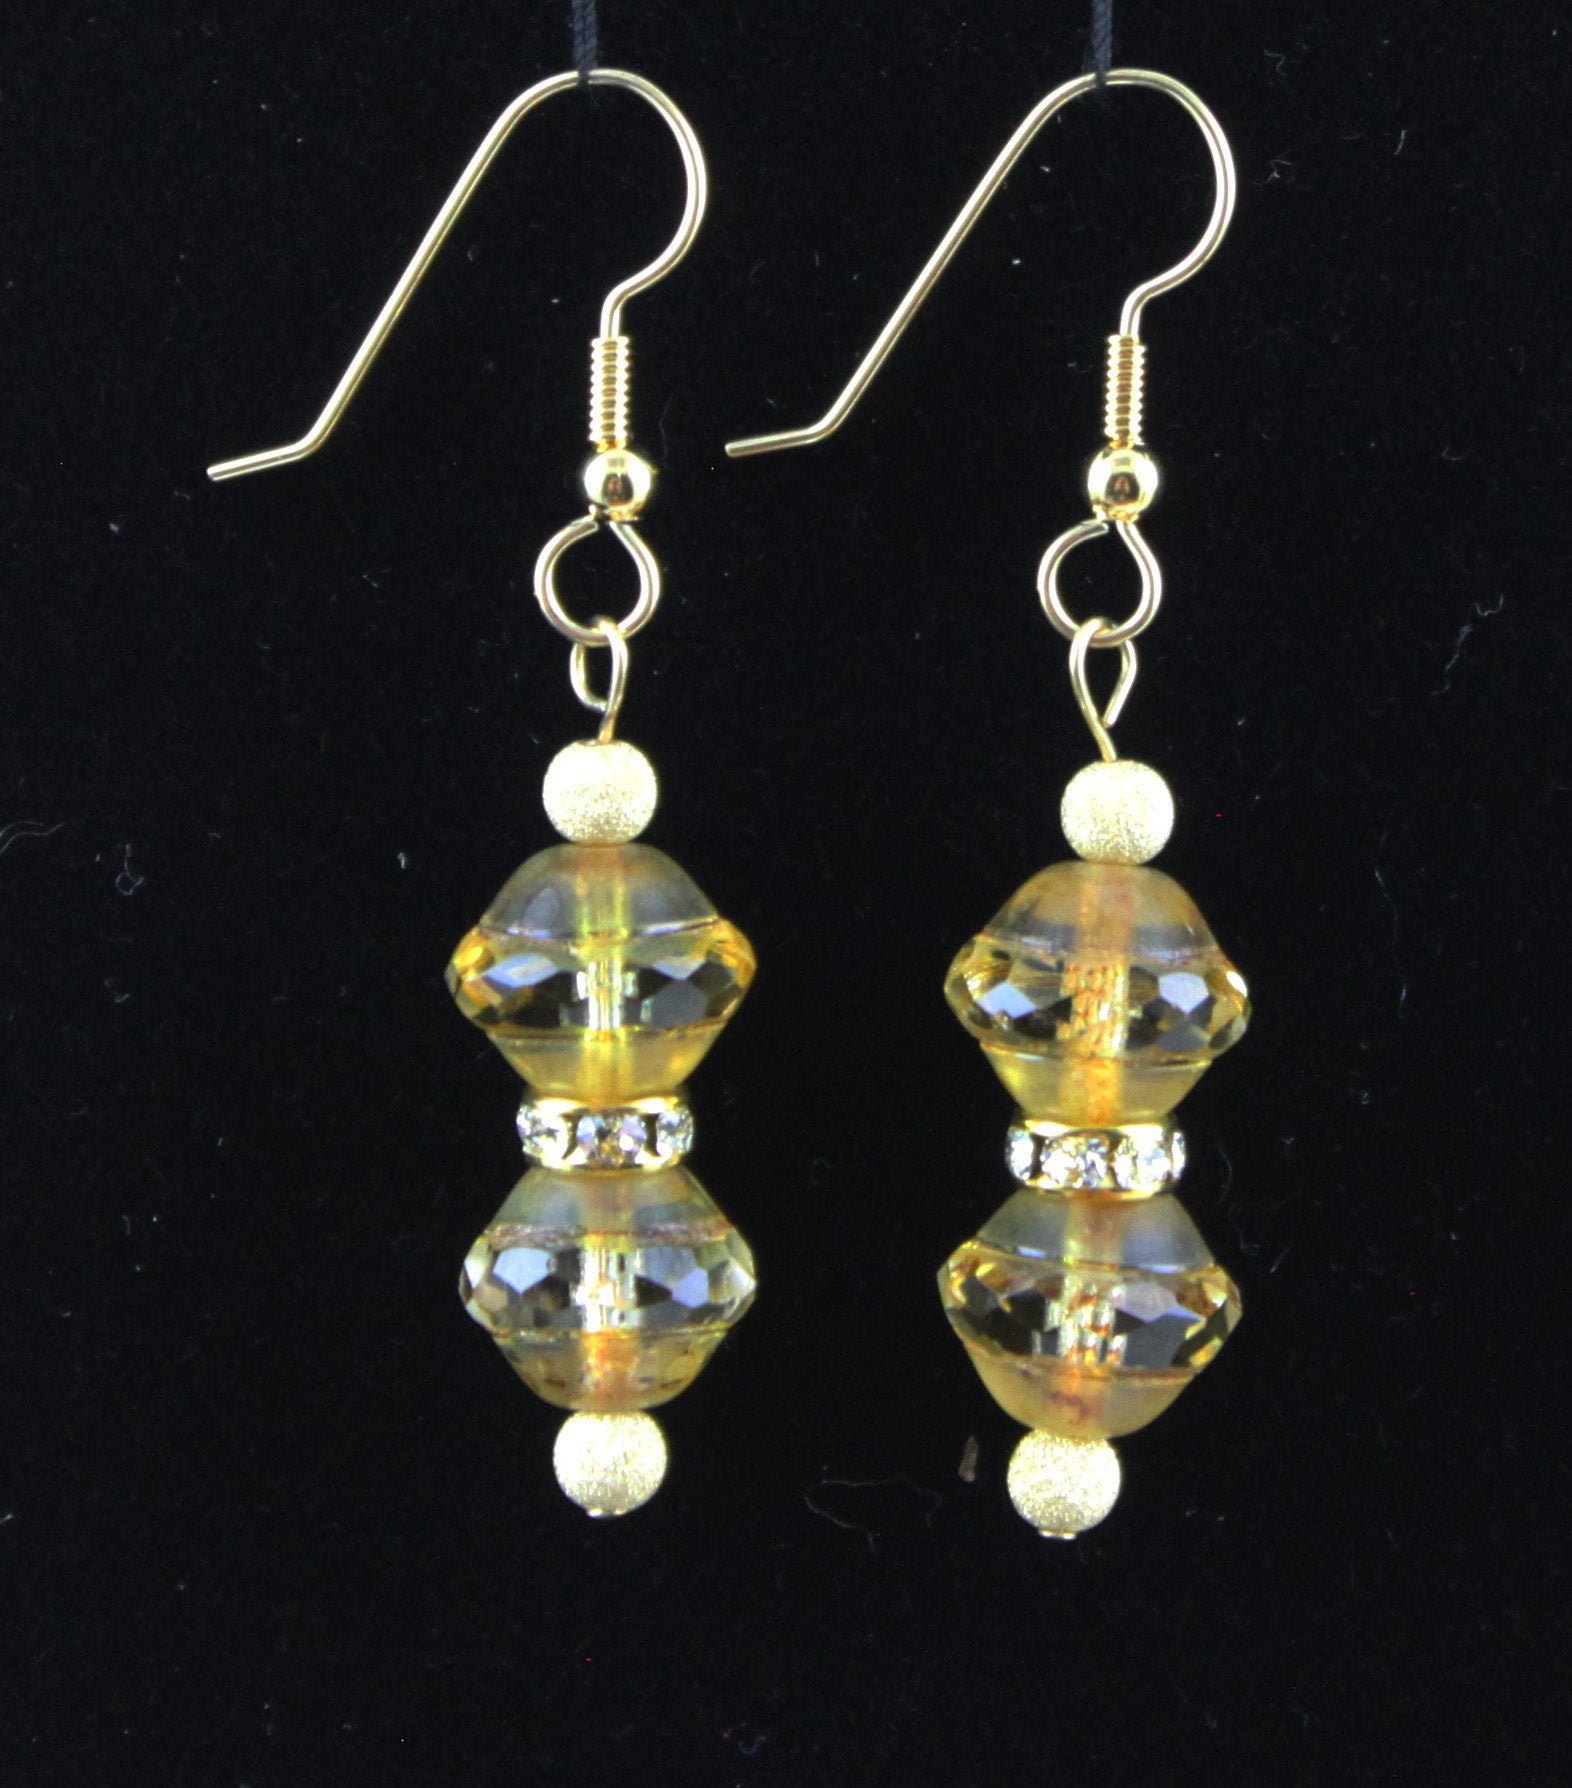 14K Gold-Filled with Swarovski Crystal Earrings